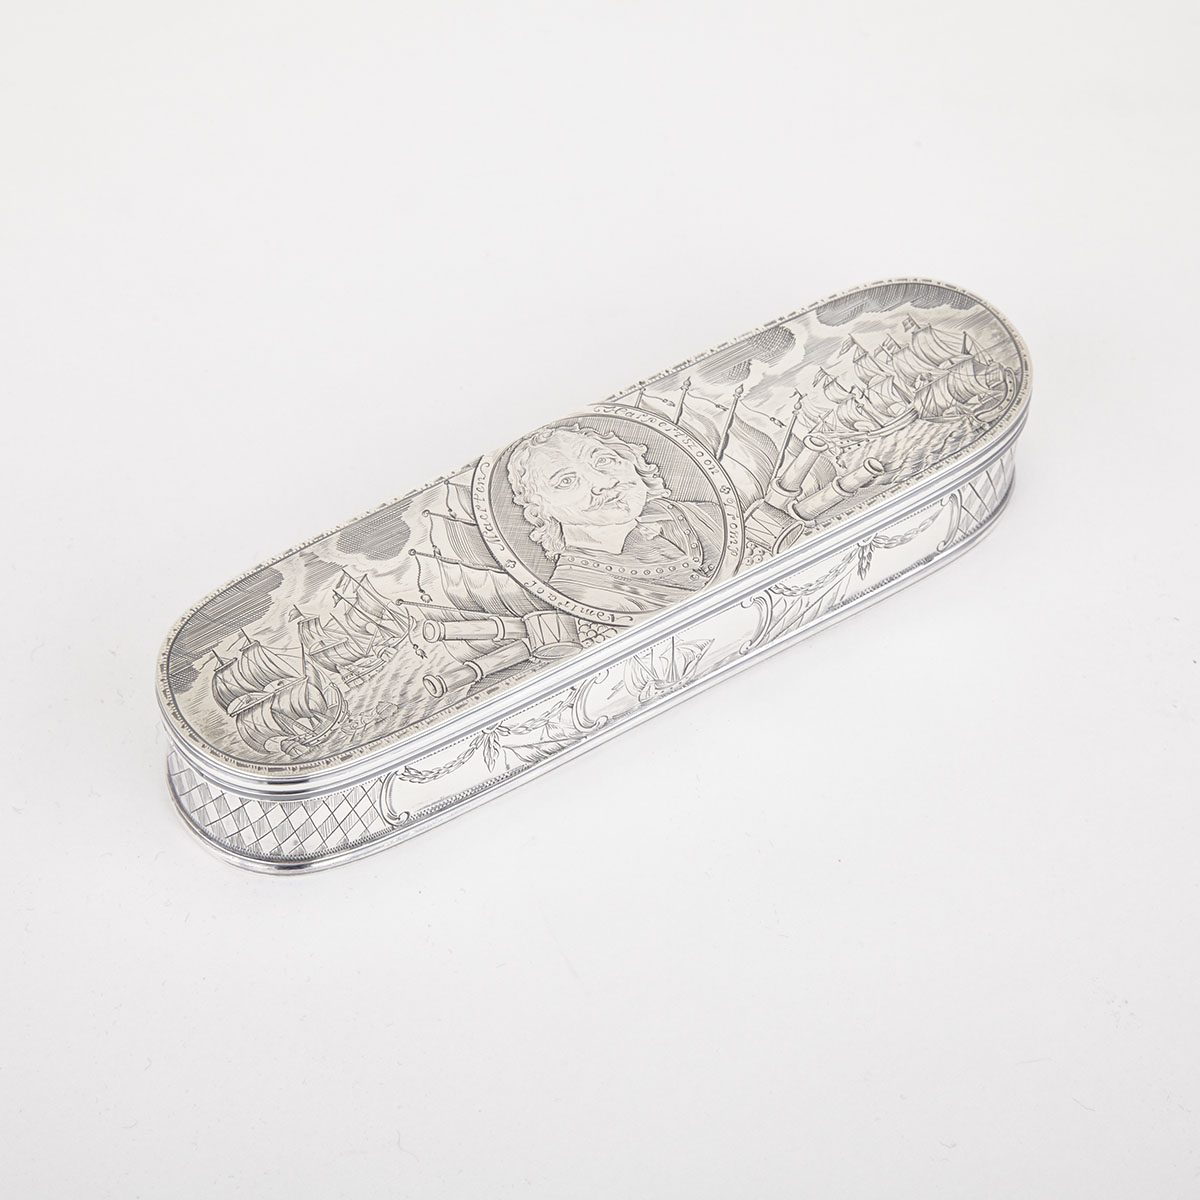 Dutch Silver Oval Tobacco Box, late 19th/early 20th century